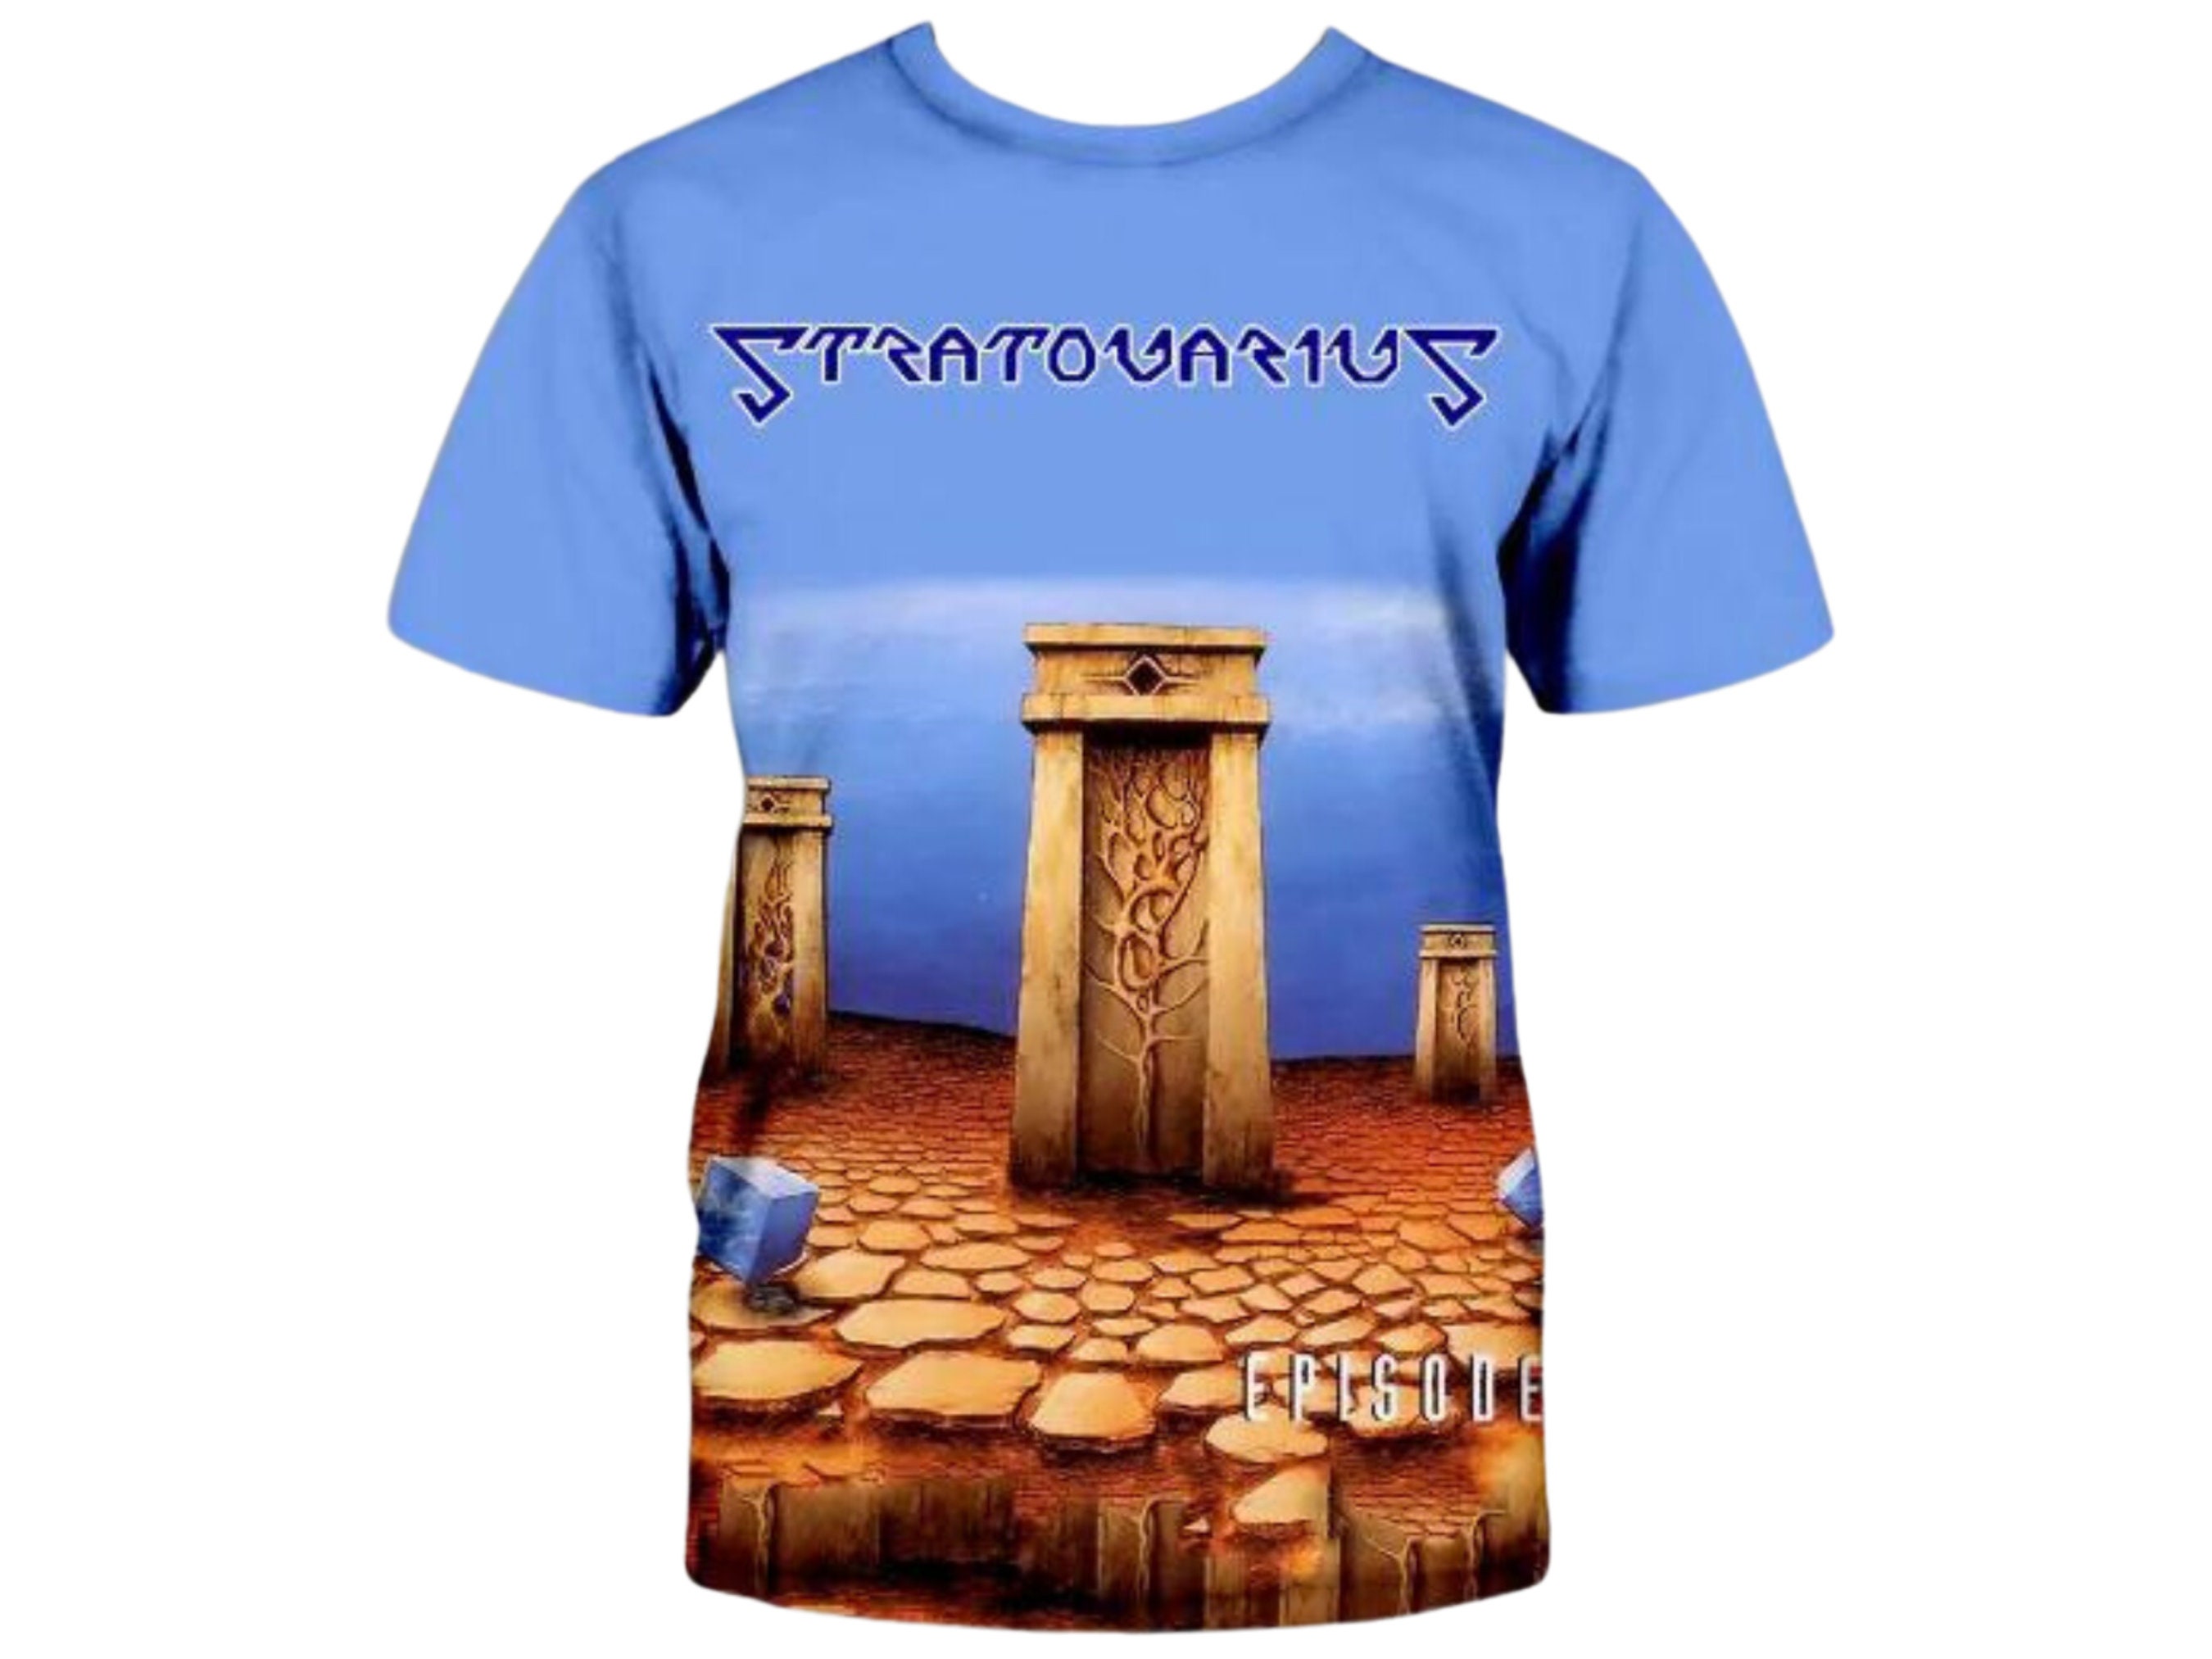 STRATOVARIUS BAND Essential T-Shirt for Sale by ScarlettSwaniai